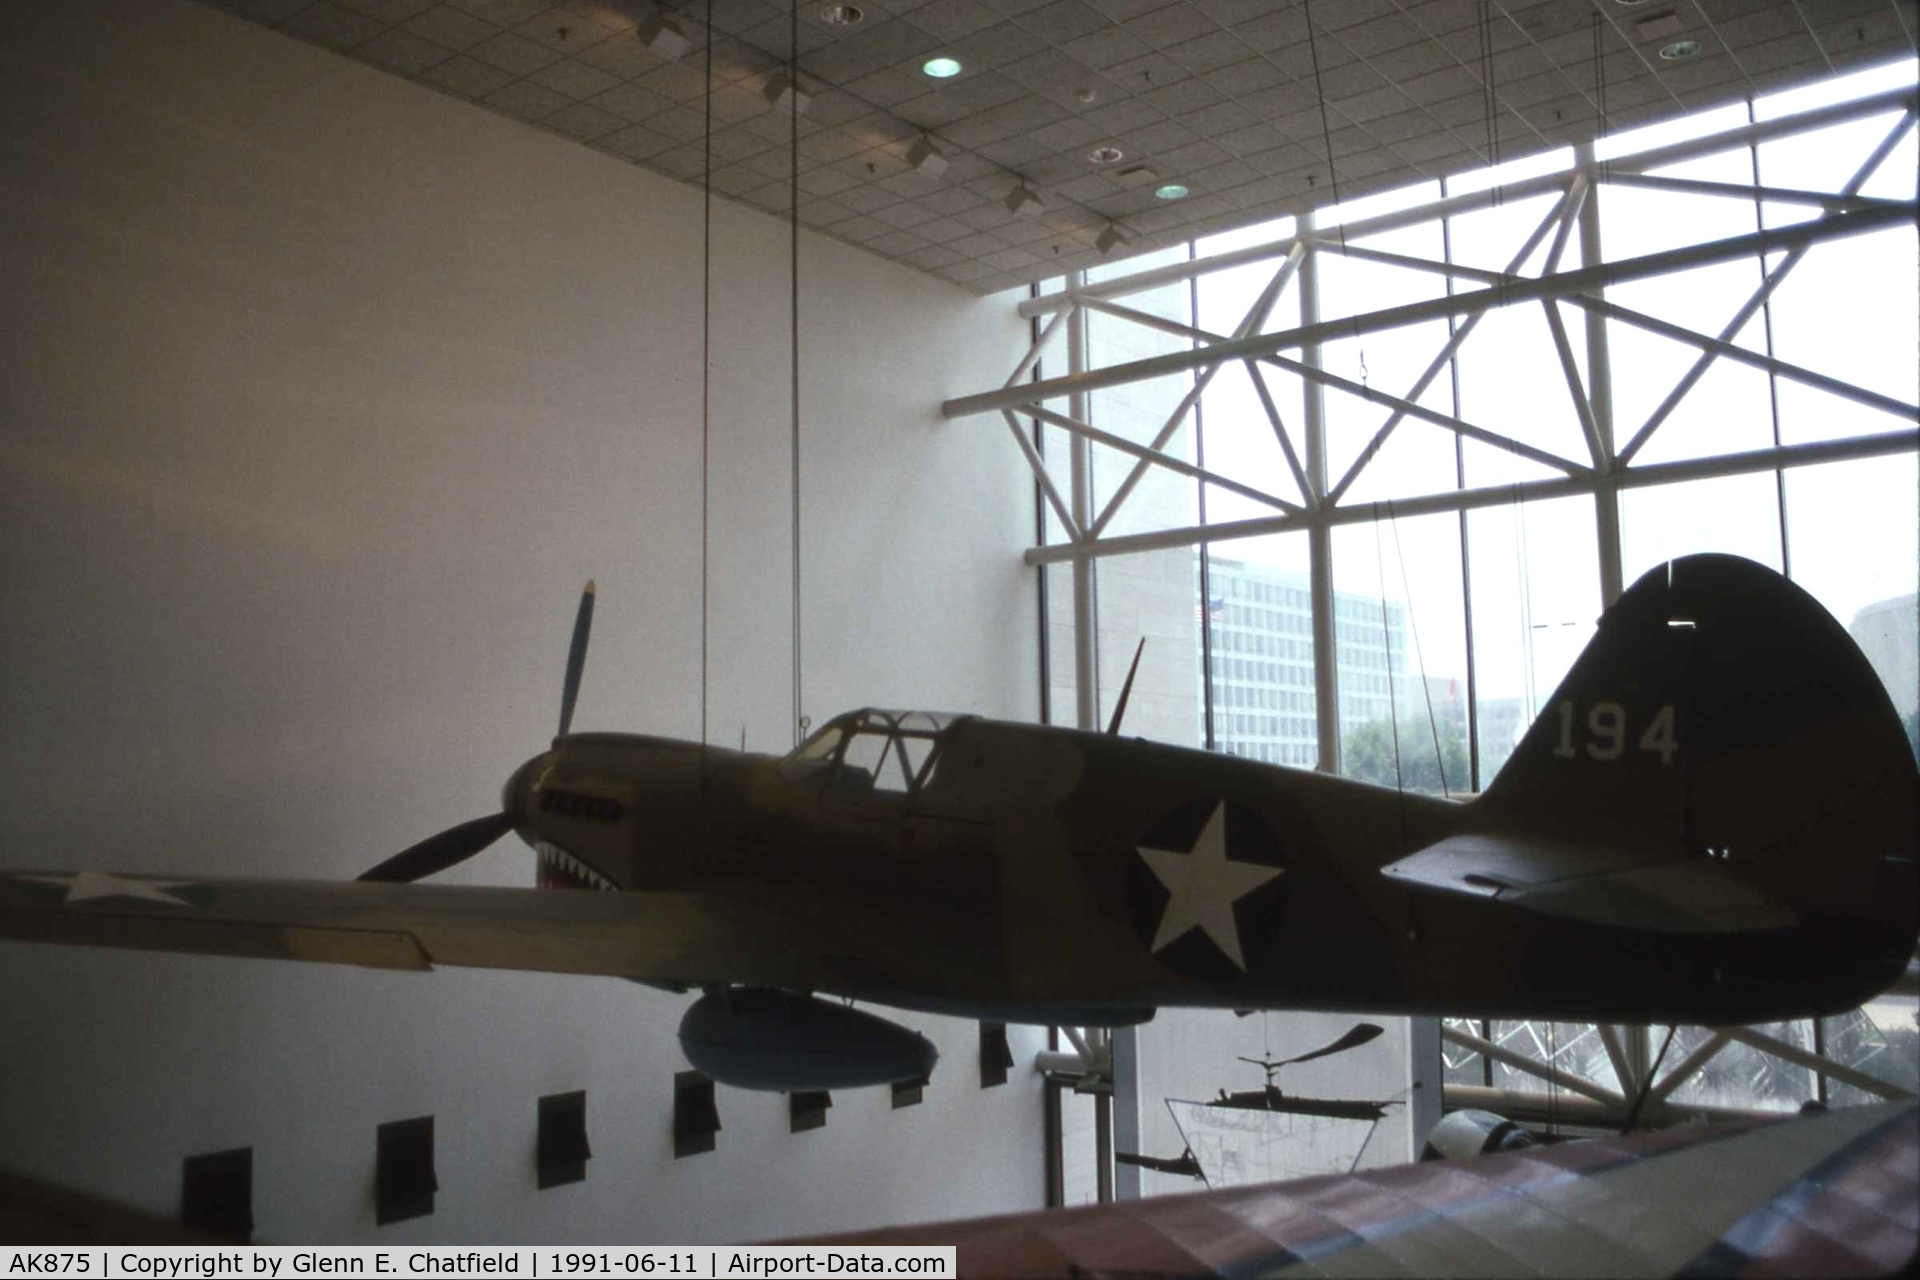 AK875, 1942 Curtiss P-40E Kittyhawk 1A C/N 15349, Hanging at the National Air & Space Museum